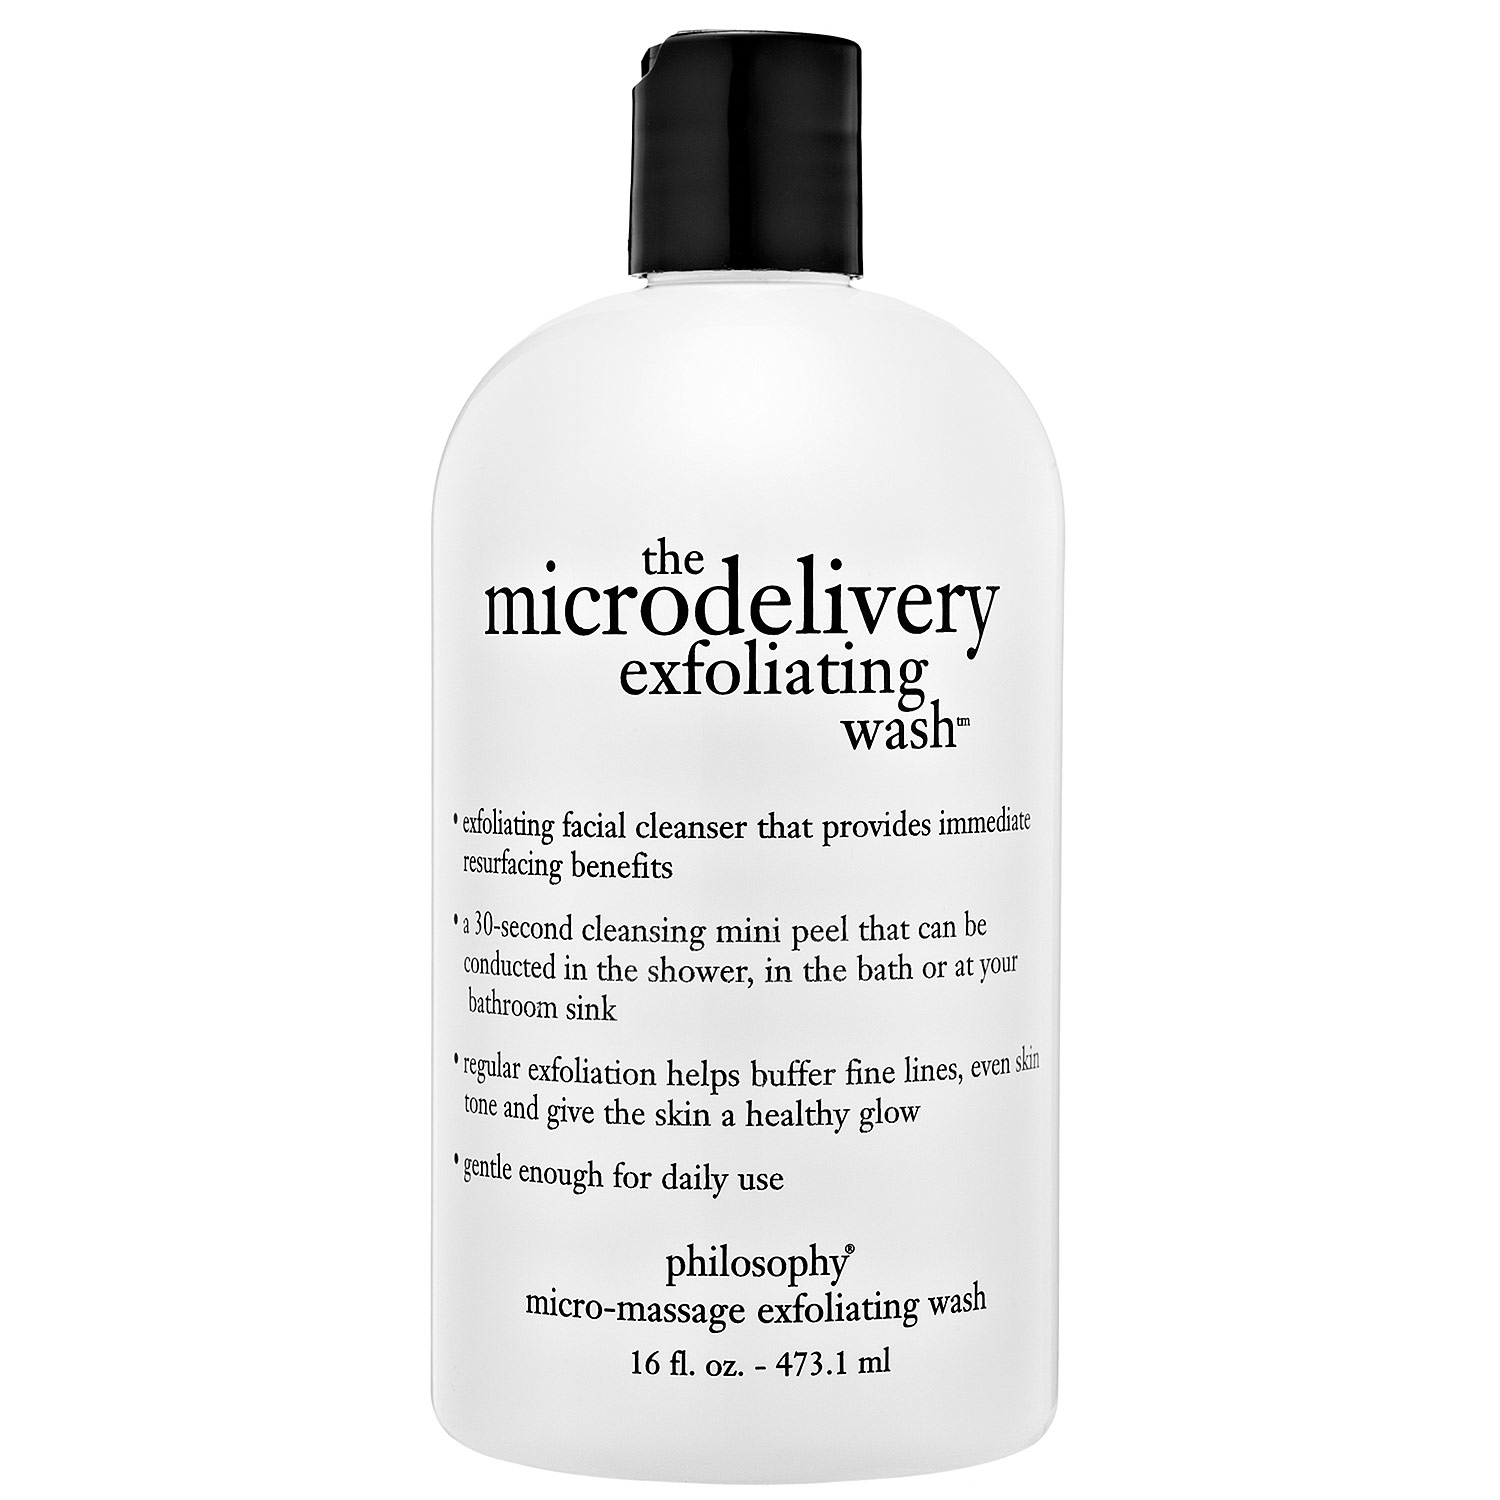 Philosophy Microdelivery Exfoliating Wash, 16 fl oz - image 2 of 2